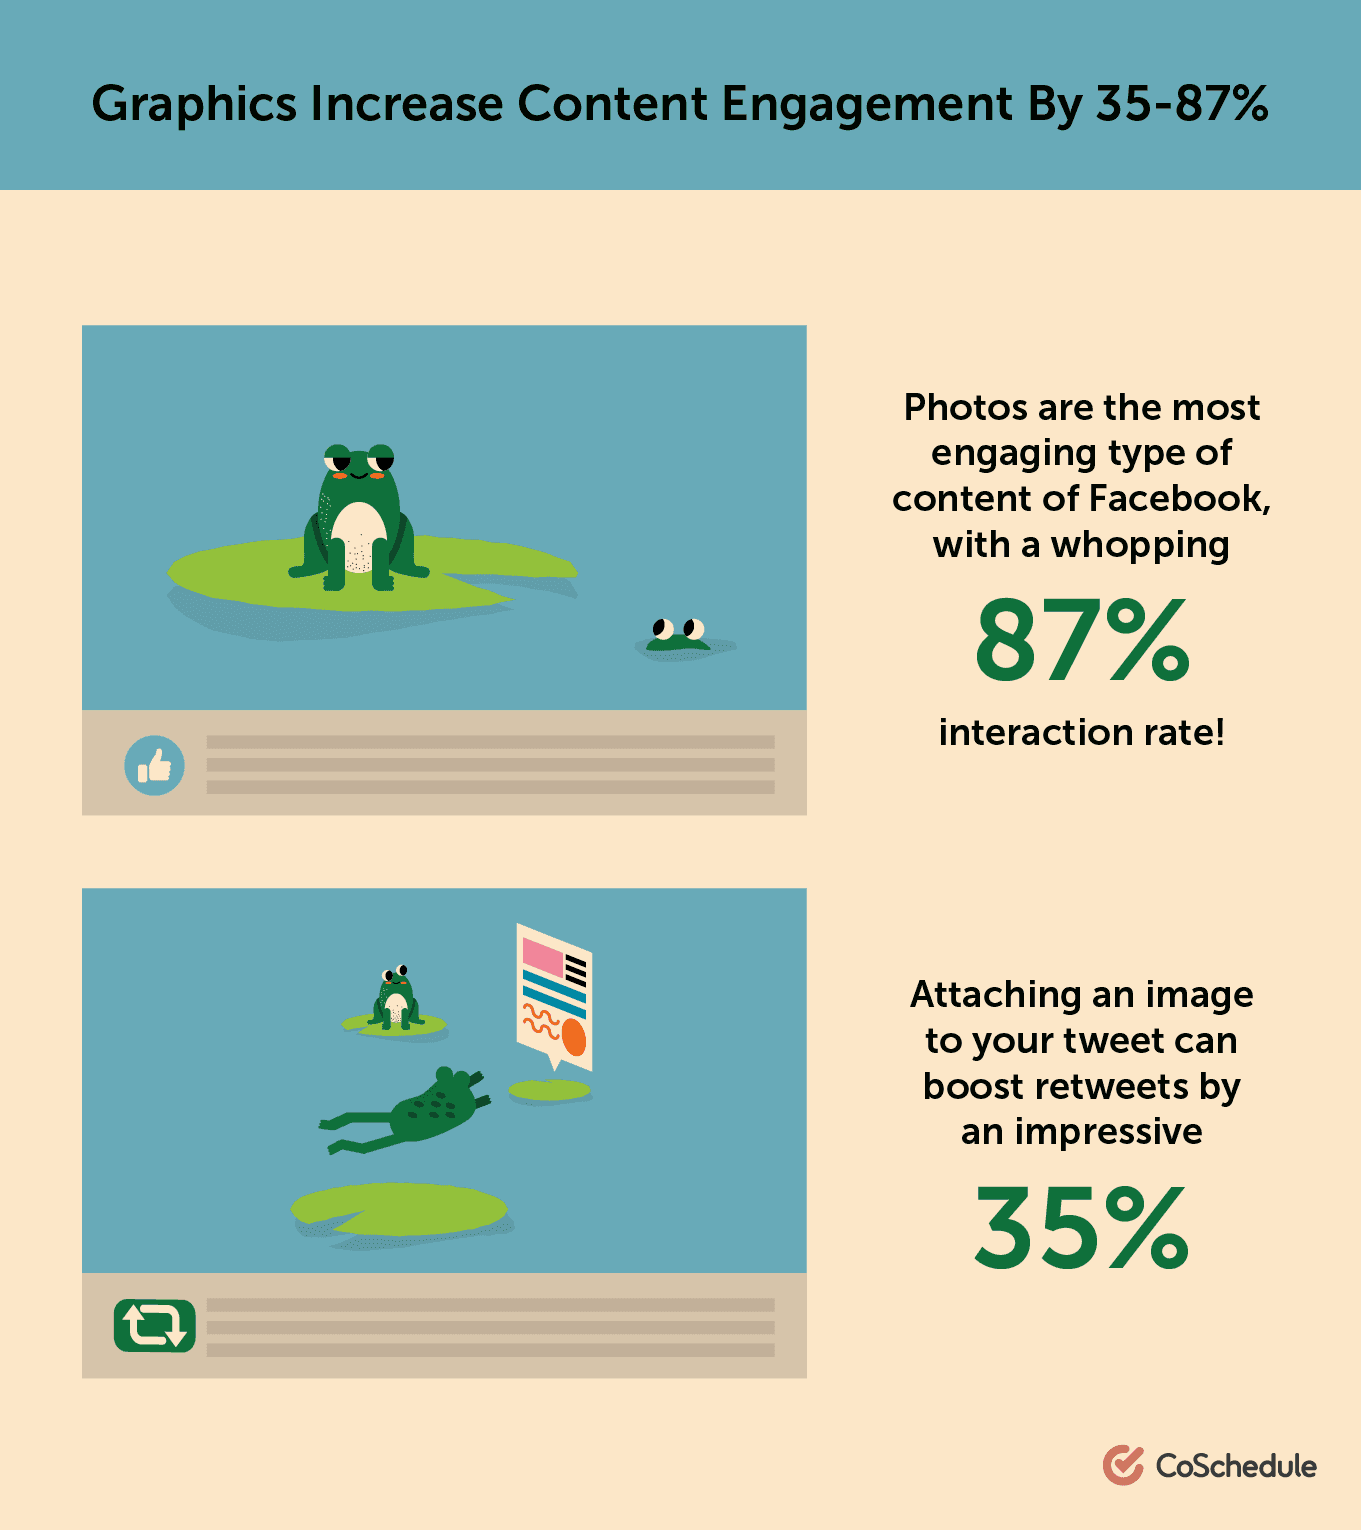 Graphics increase content engagement